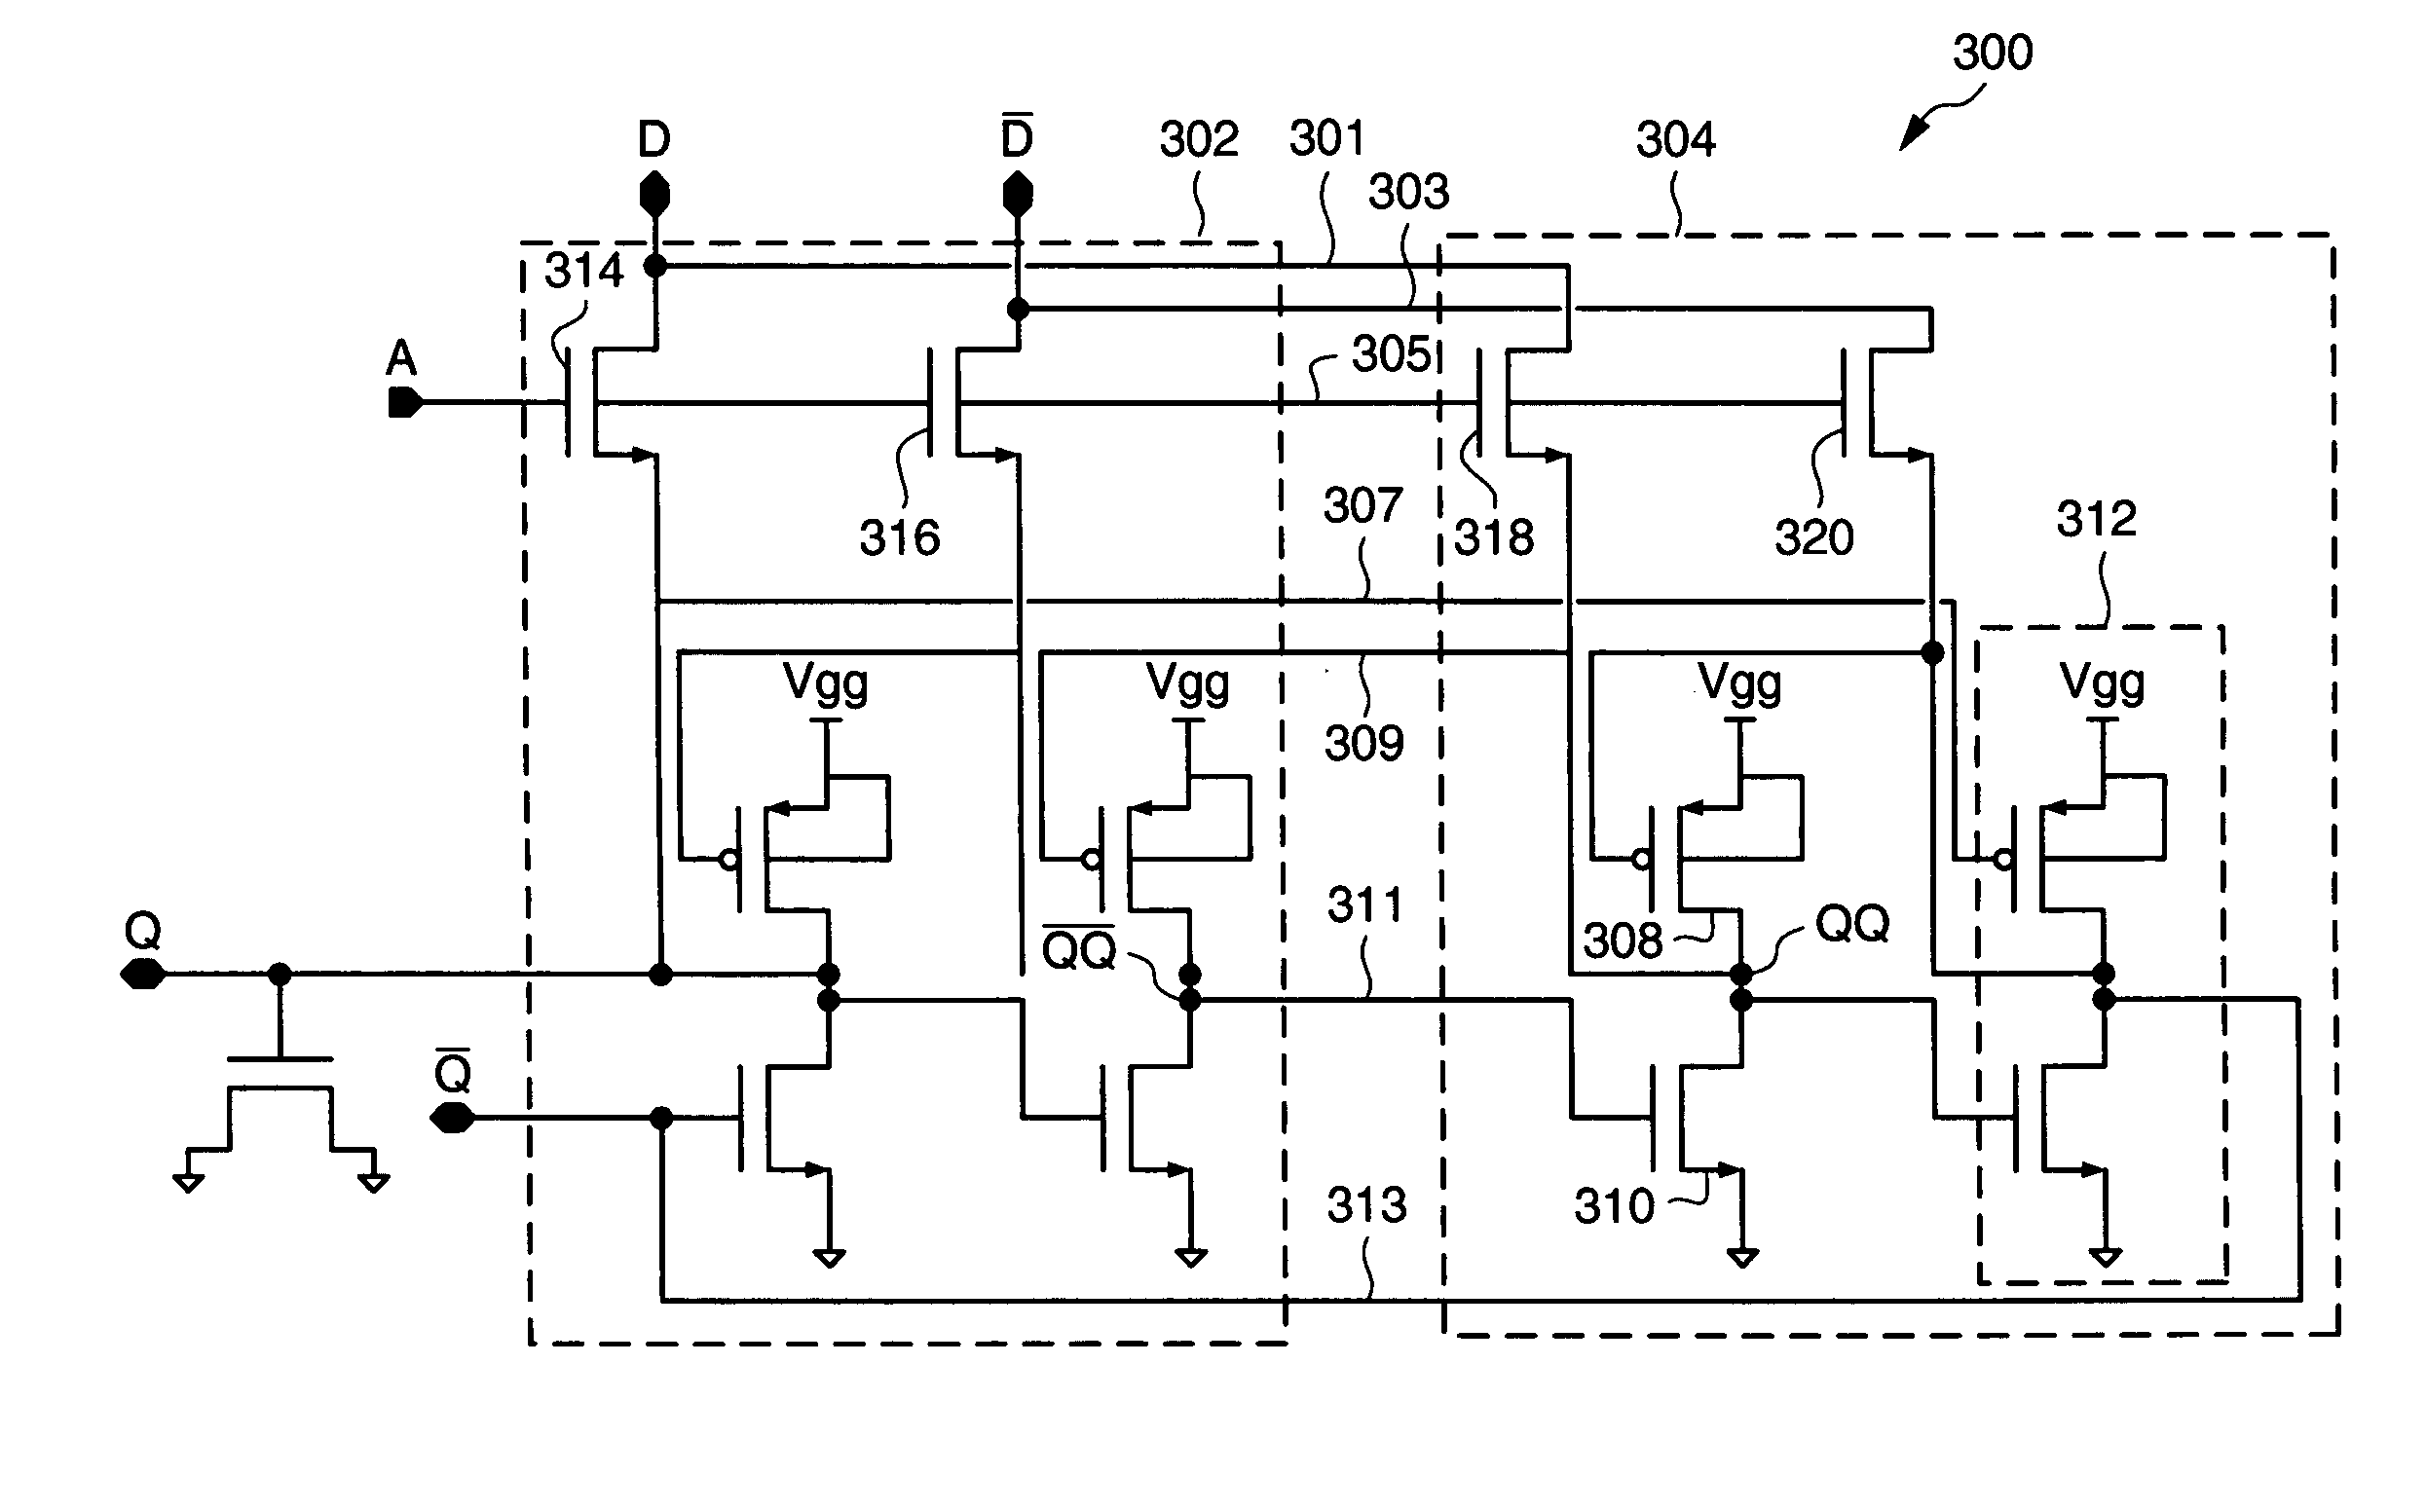 Single event upset tolerant memory cell layout